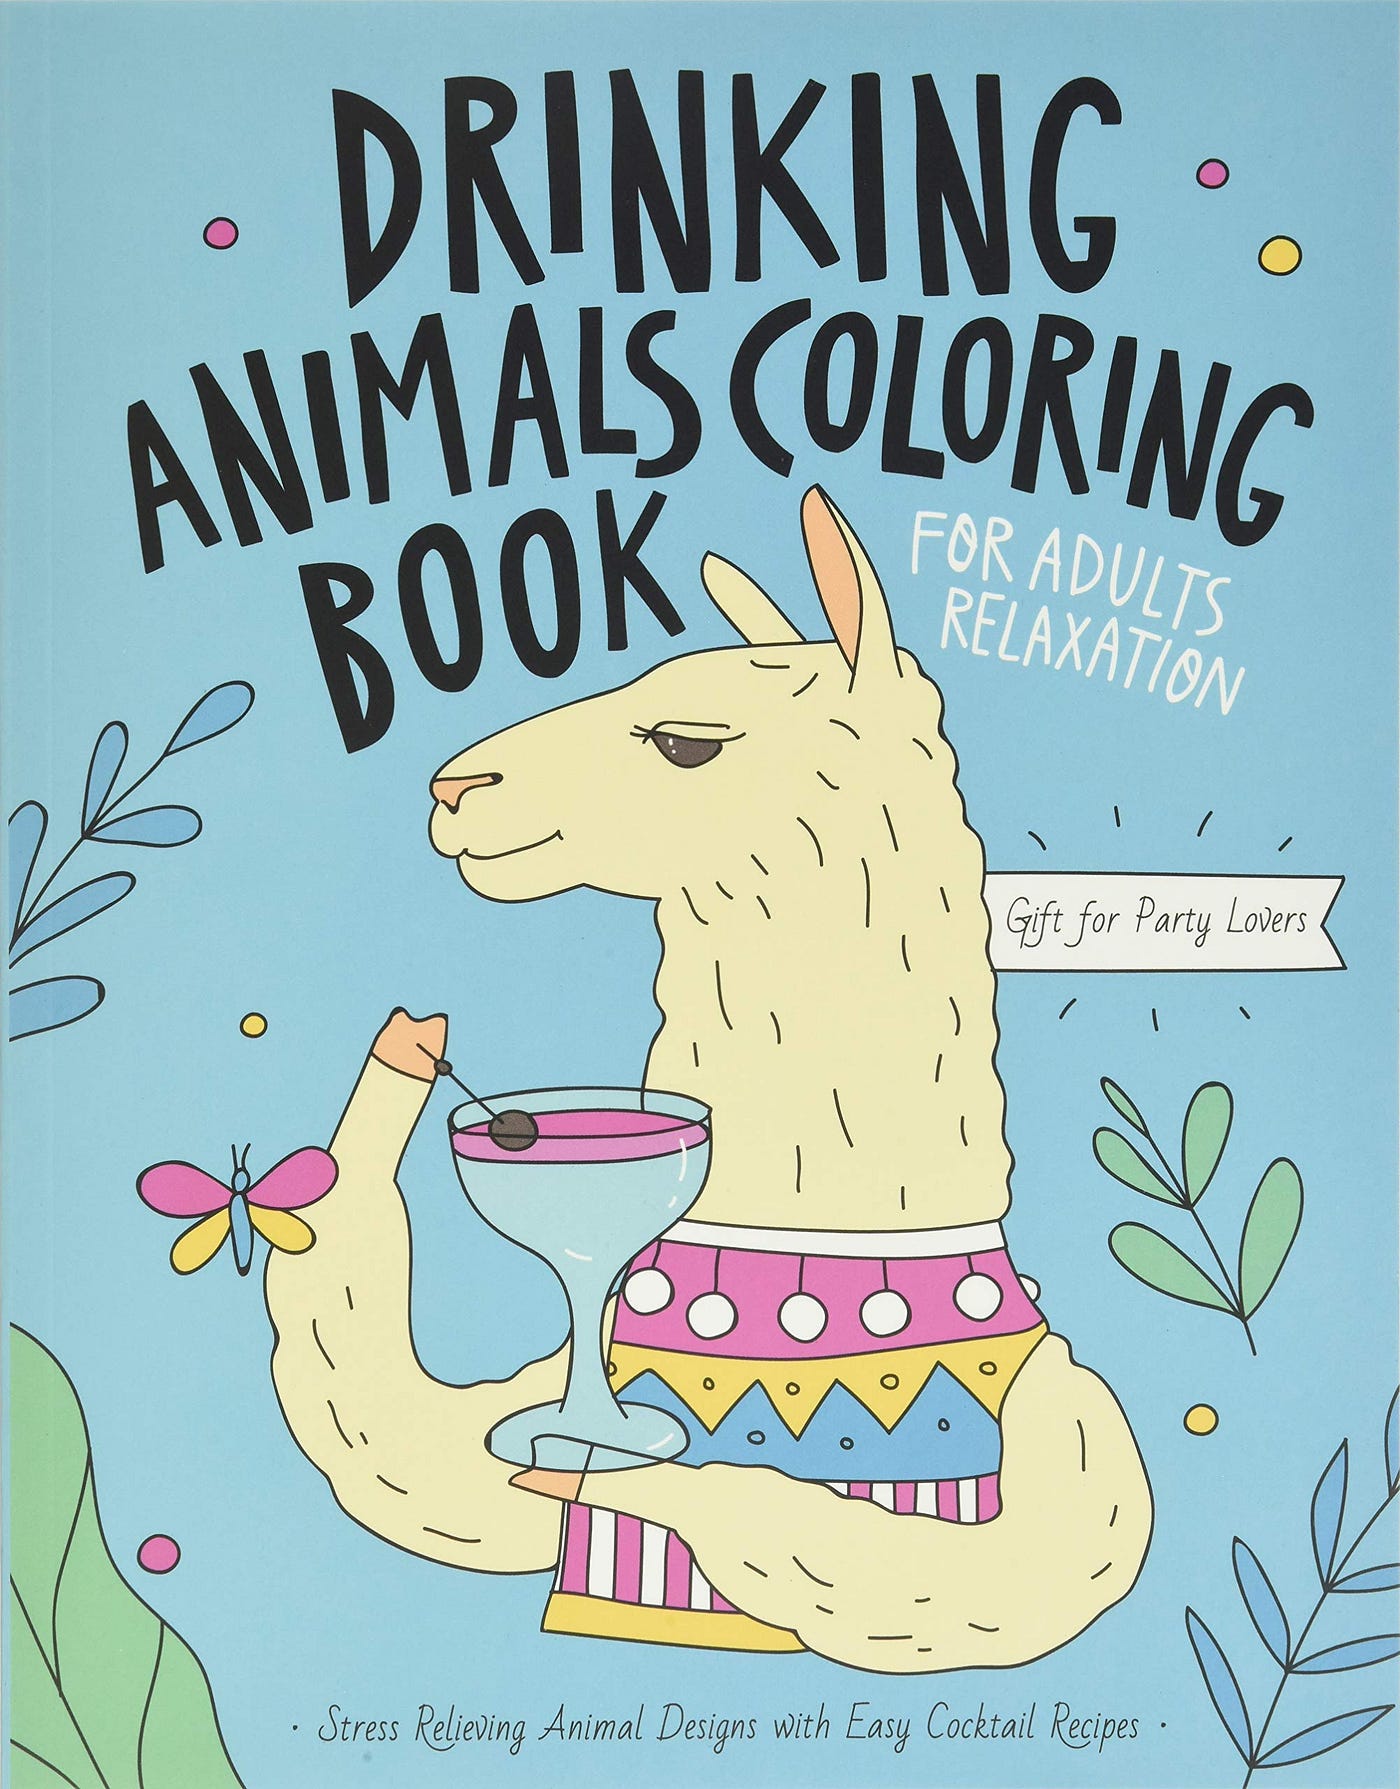 Whimsical Animals (Adult Coloring Books #7) (Paperback)